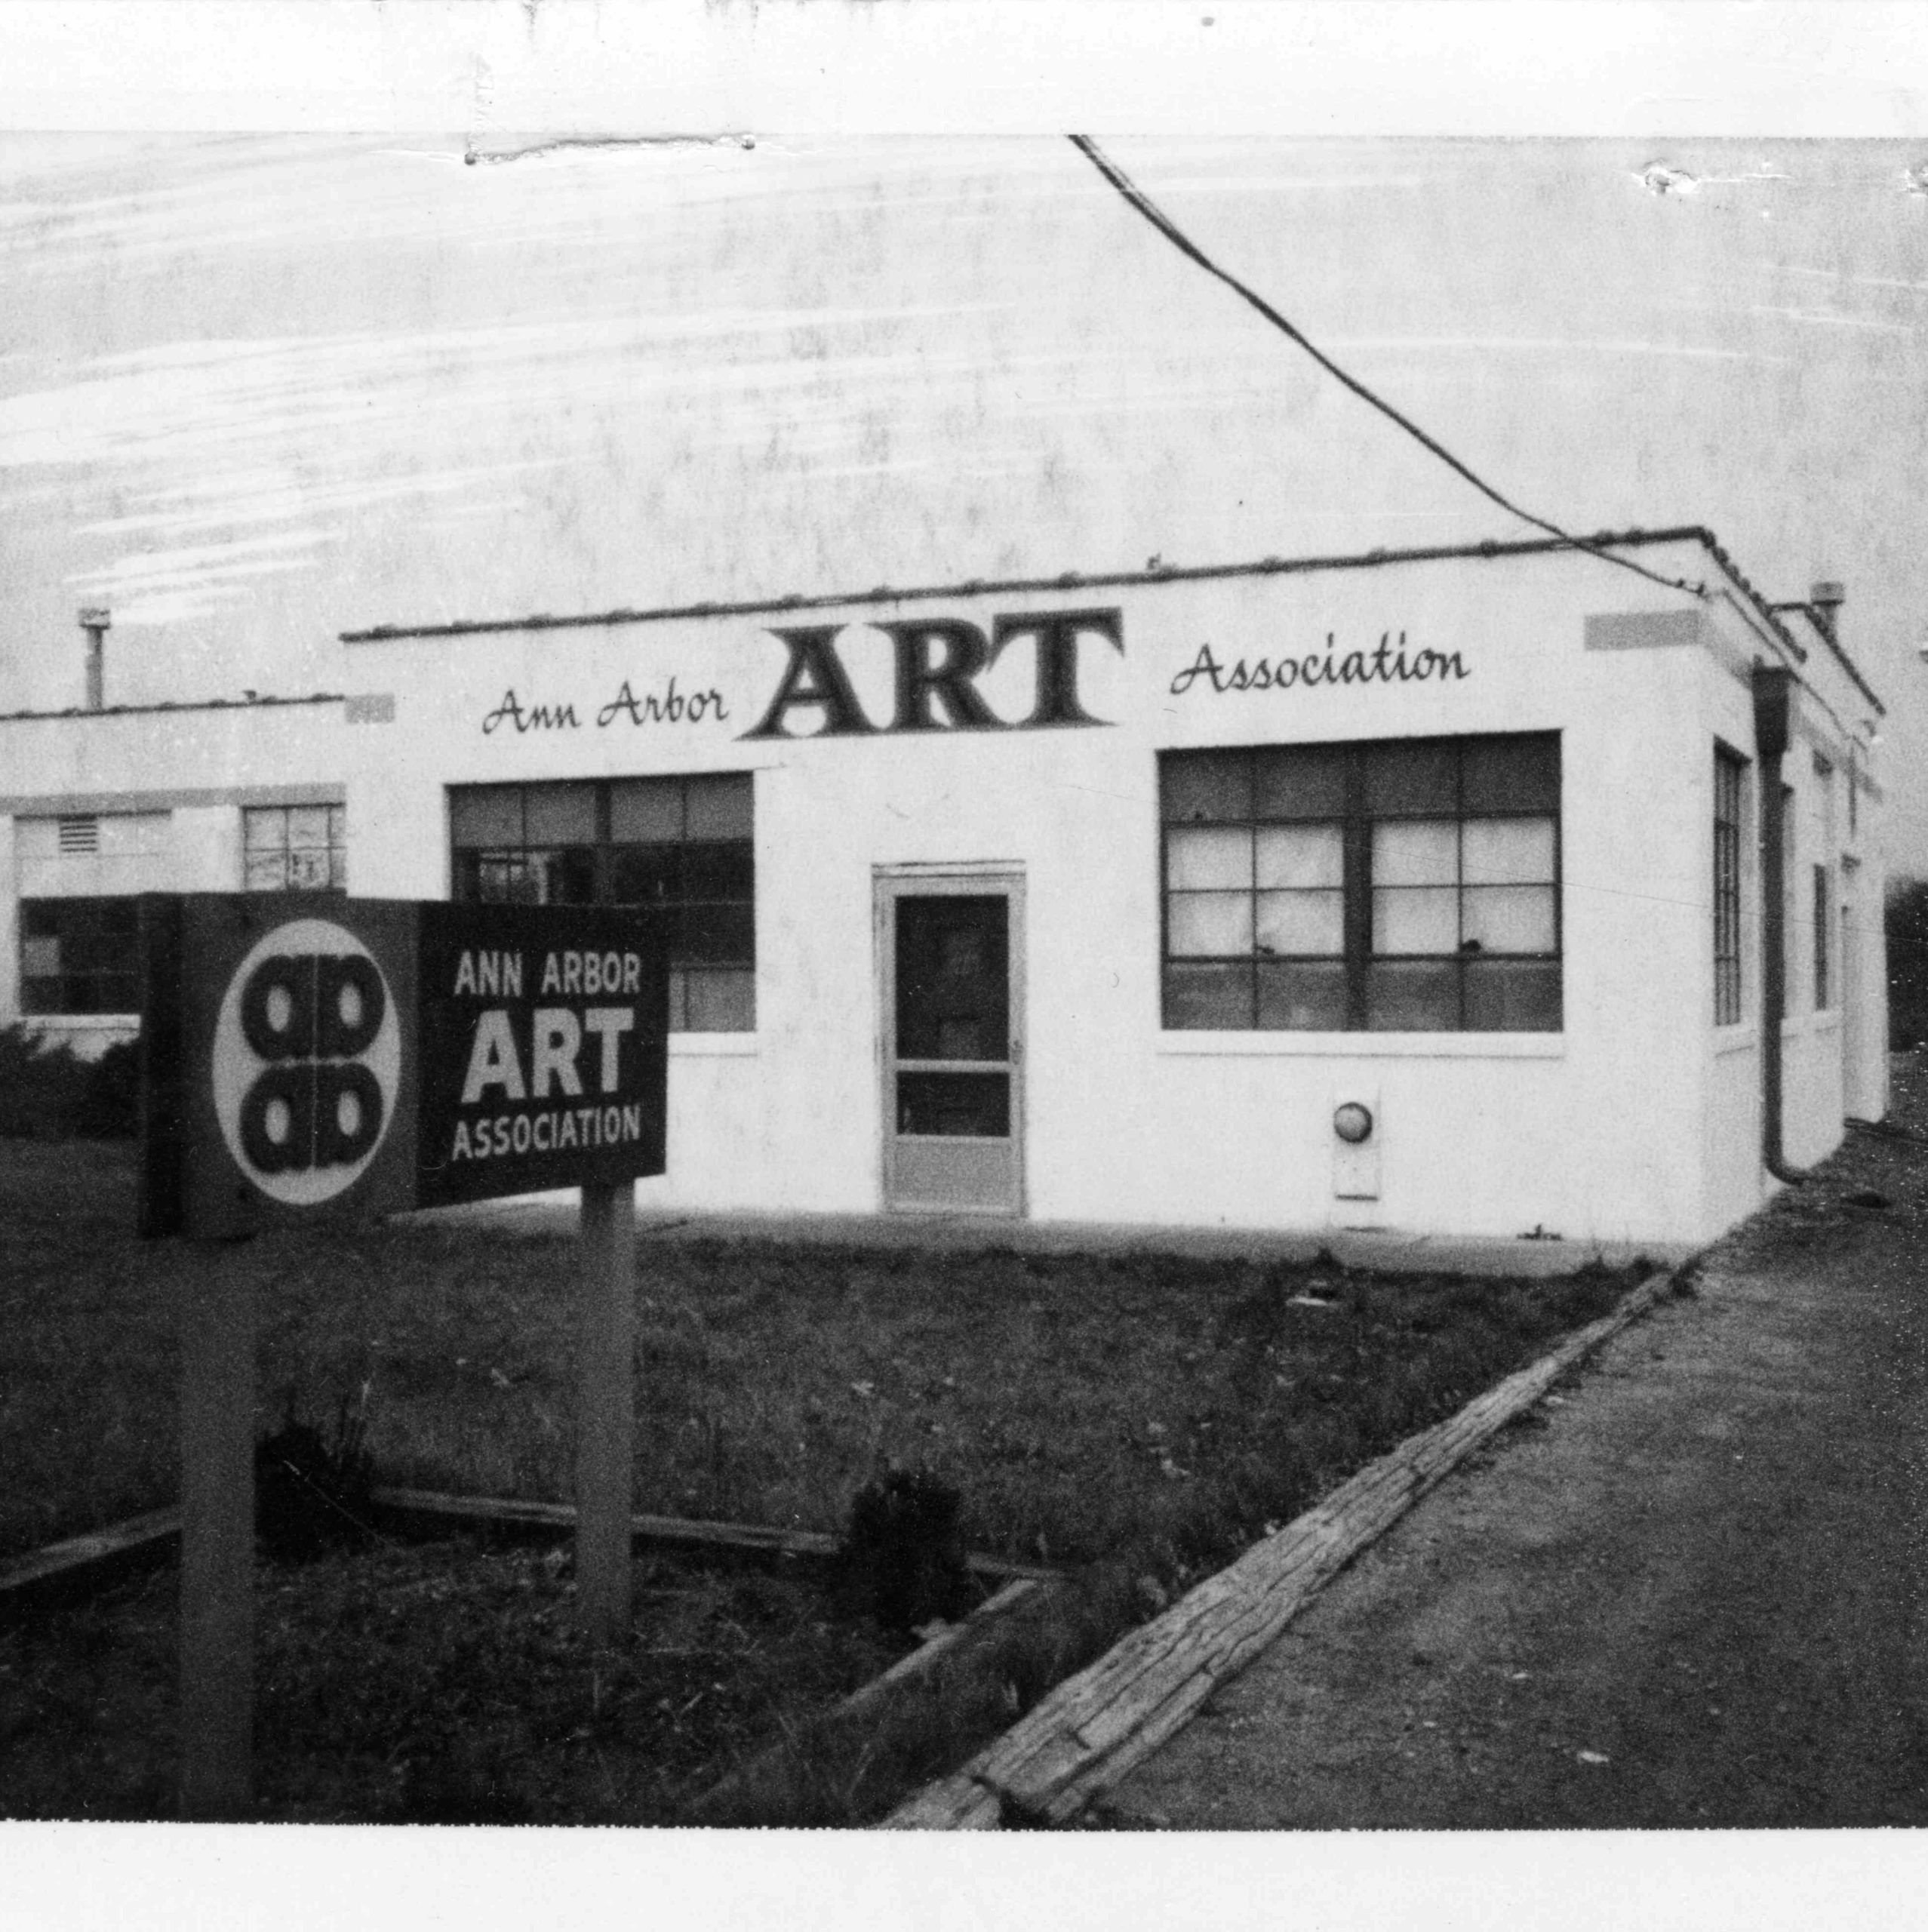 A2AC Historical Image. Black and White photo with a small white building in the middle of the photo with a sign and name on the building that says Ann Arbor Art Association (name before A2AC).